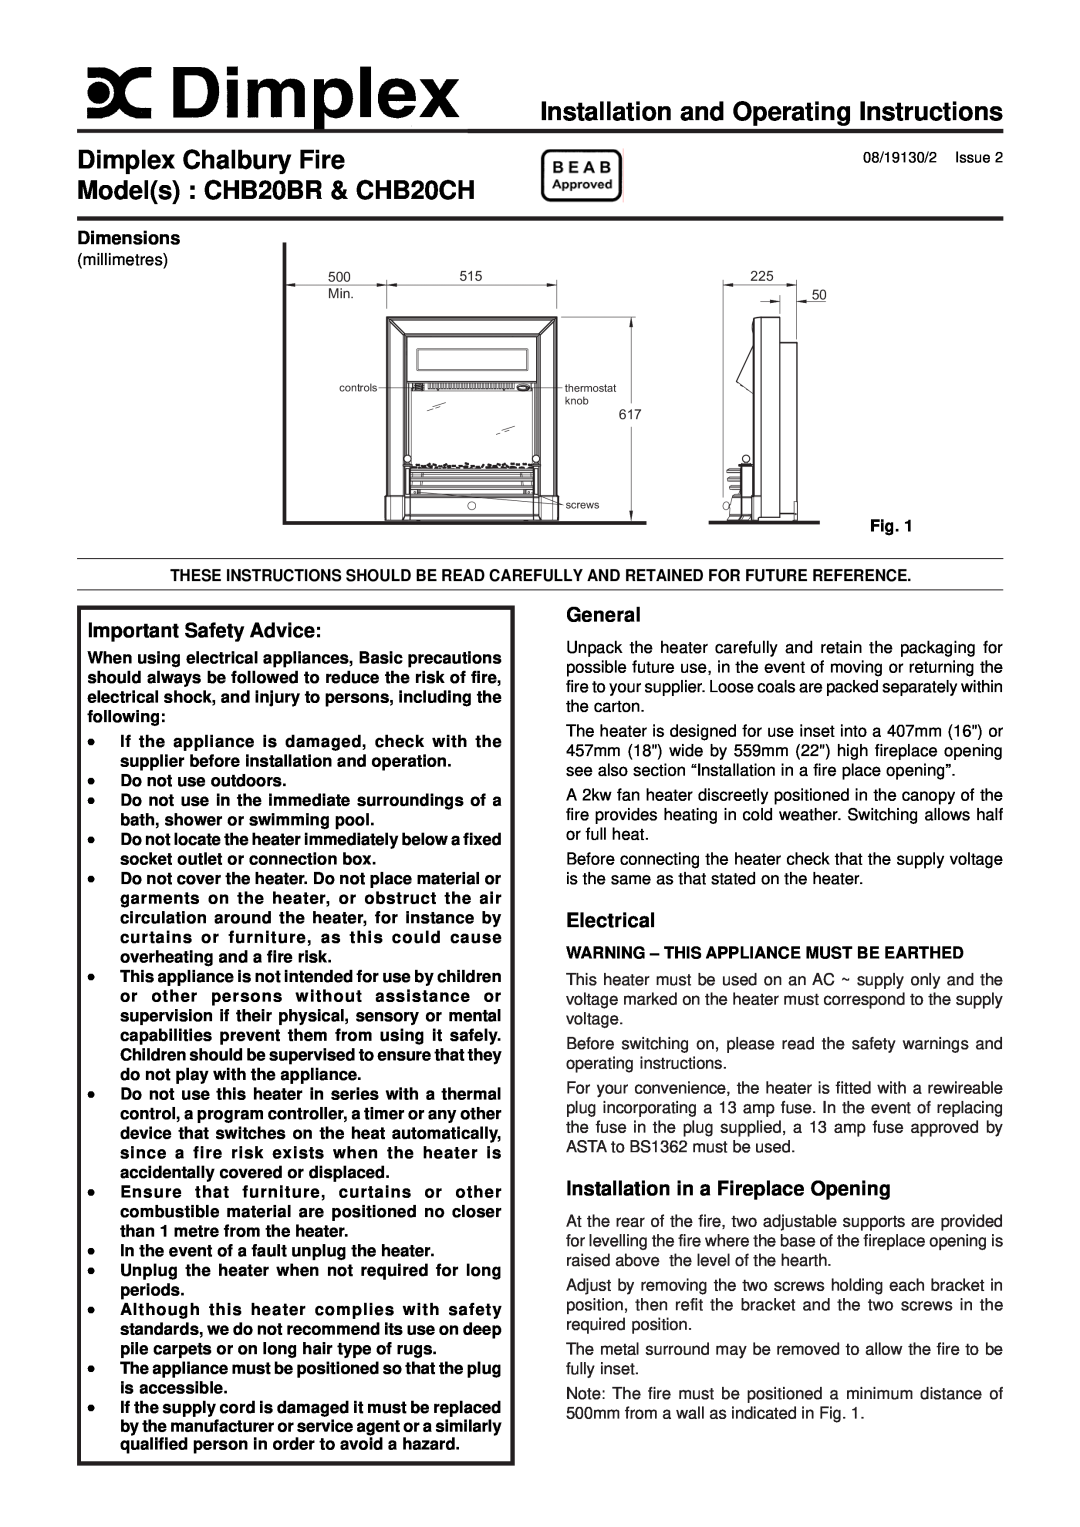 Dimplex CHB20CH dimensions Important Safety Advice, General, Electrical, Installation in a Fireplace Opening, Dimensions 